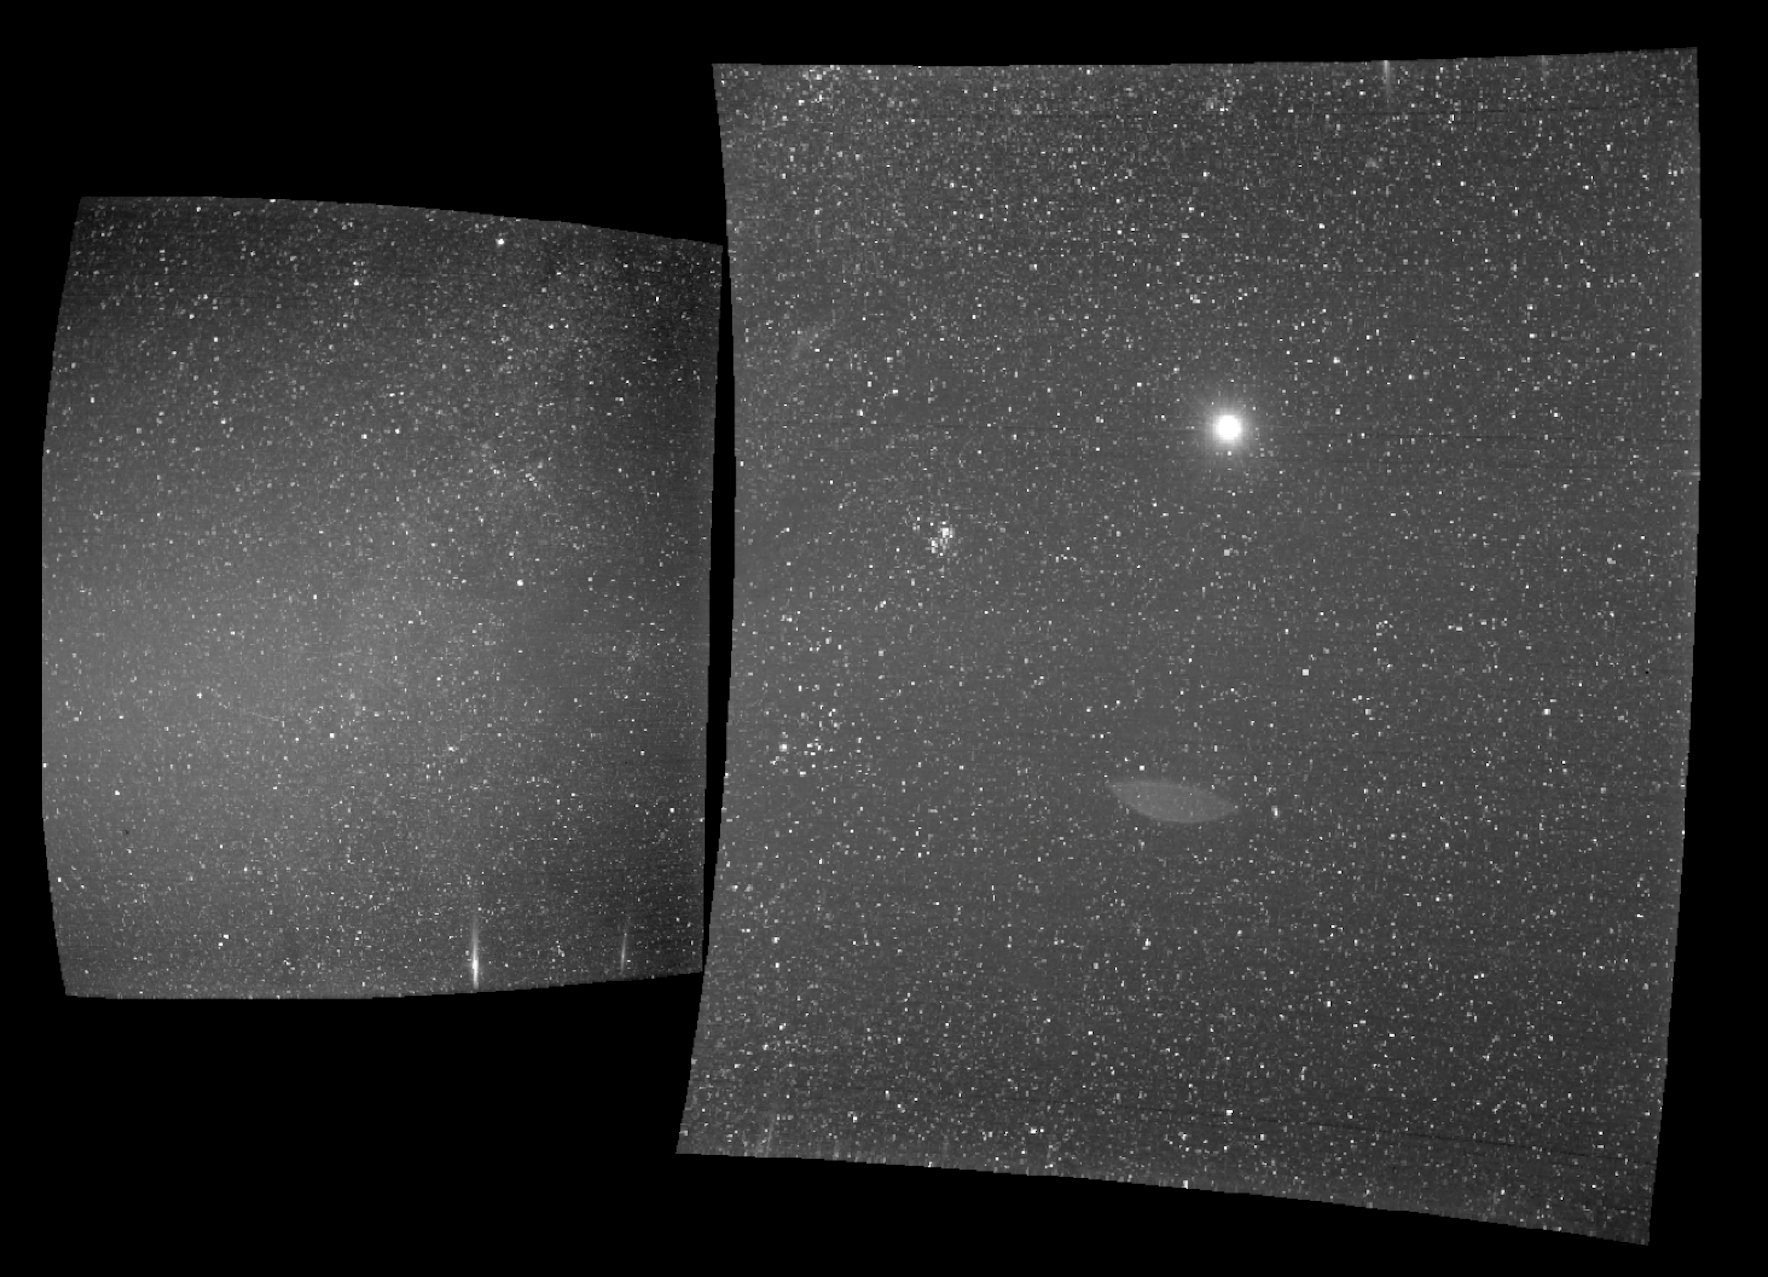 An image of Earth (bright spot on right) captured by NASA's Parker Solar Probe while en route to Venus for a gravity assist. Photo: NASA